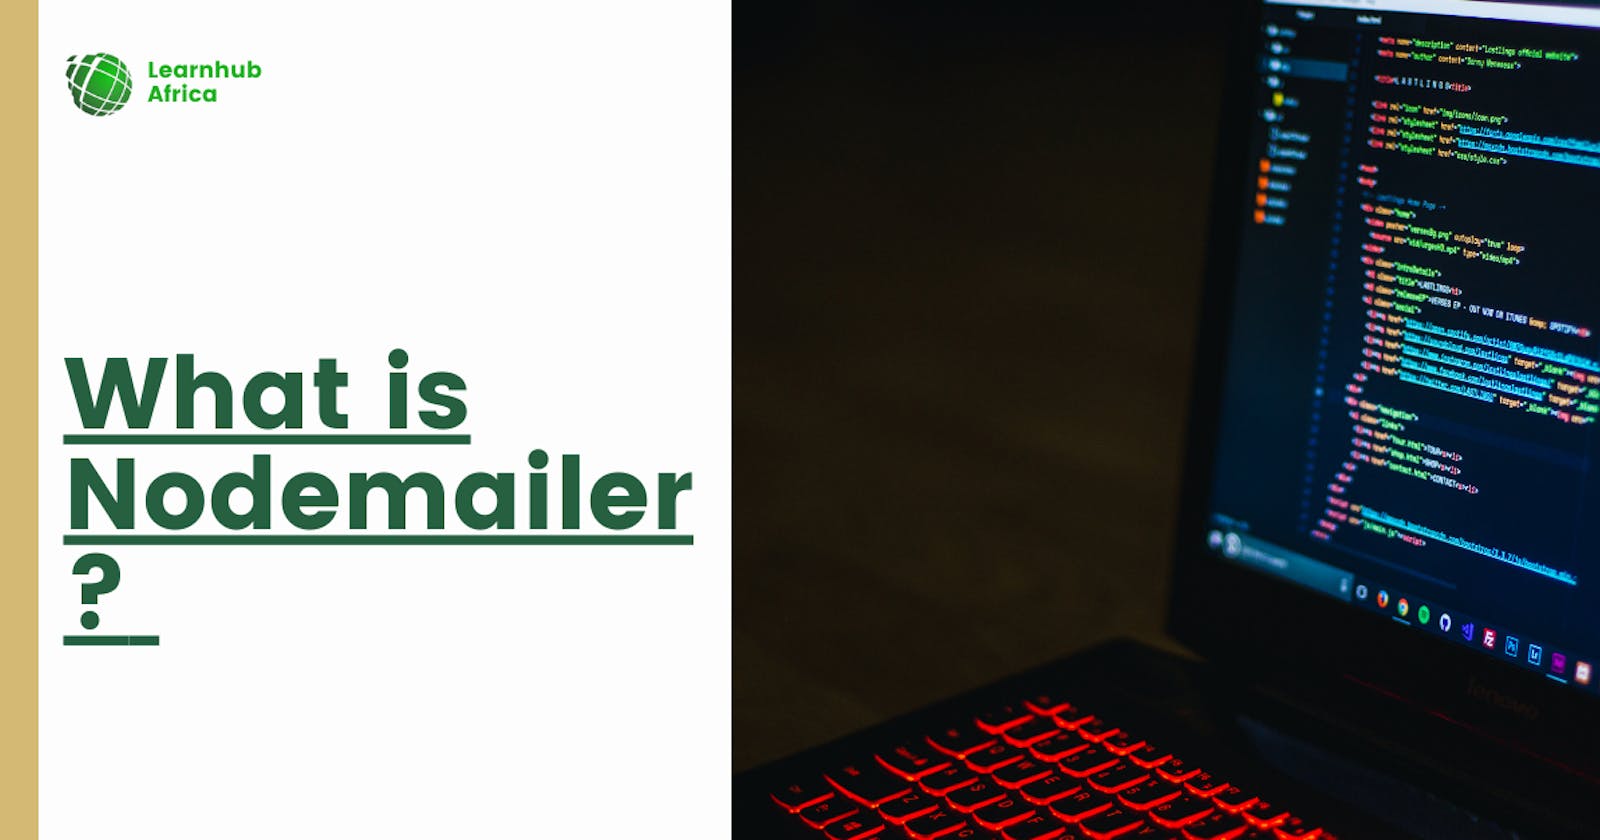 What is Nodemailer?